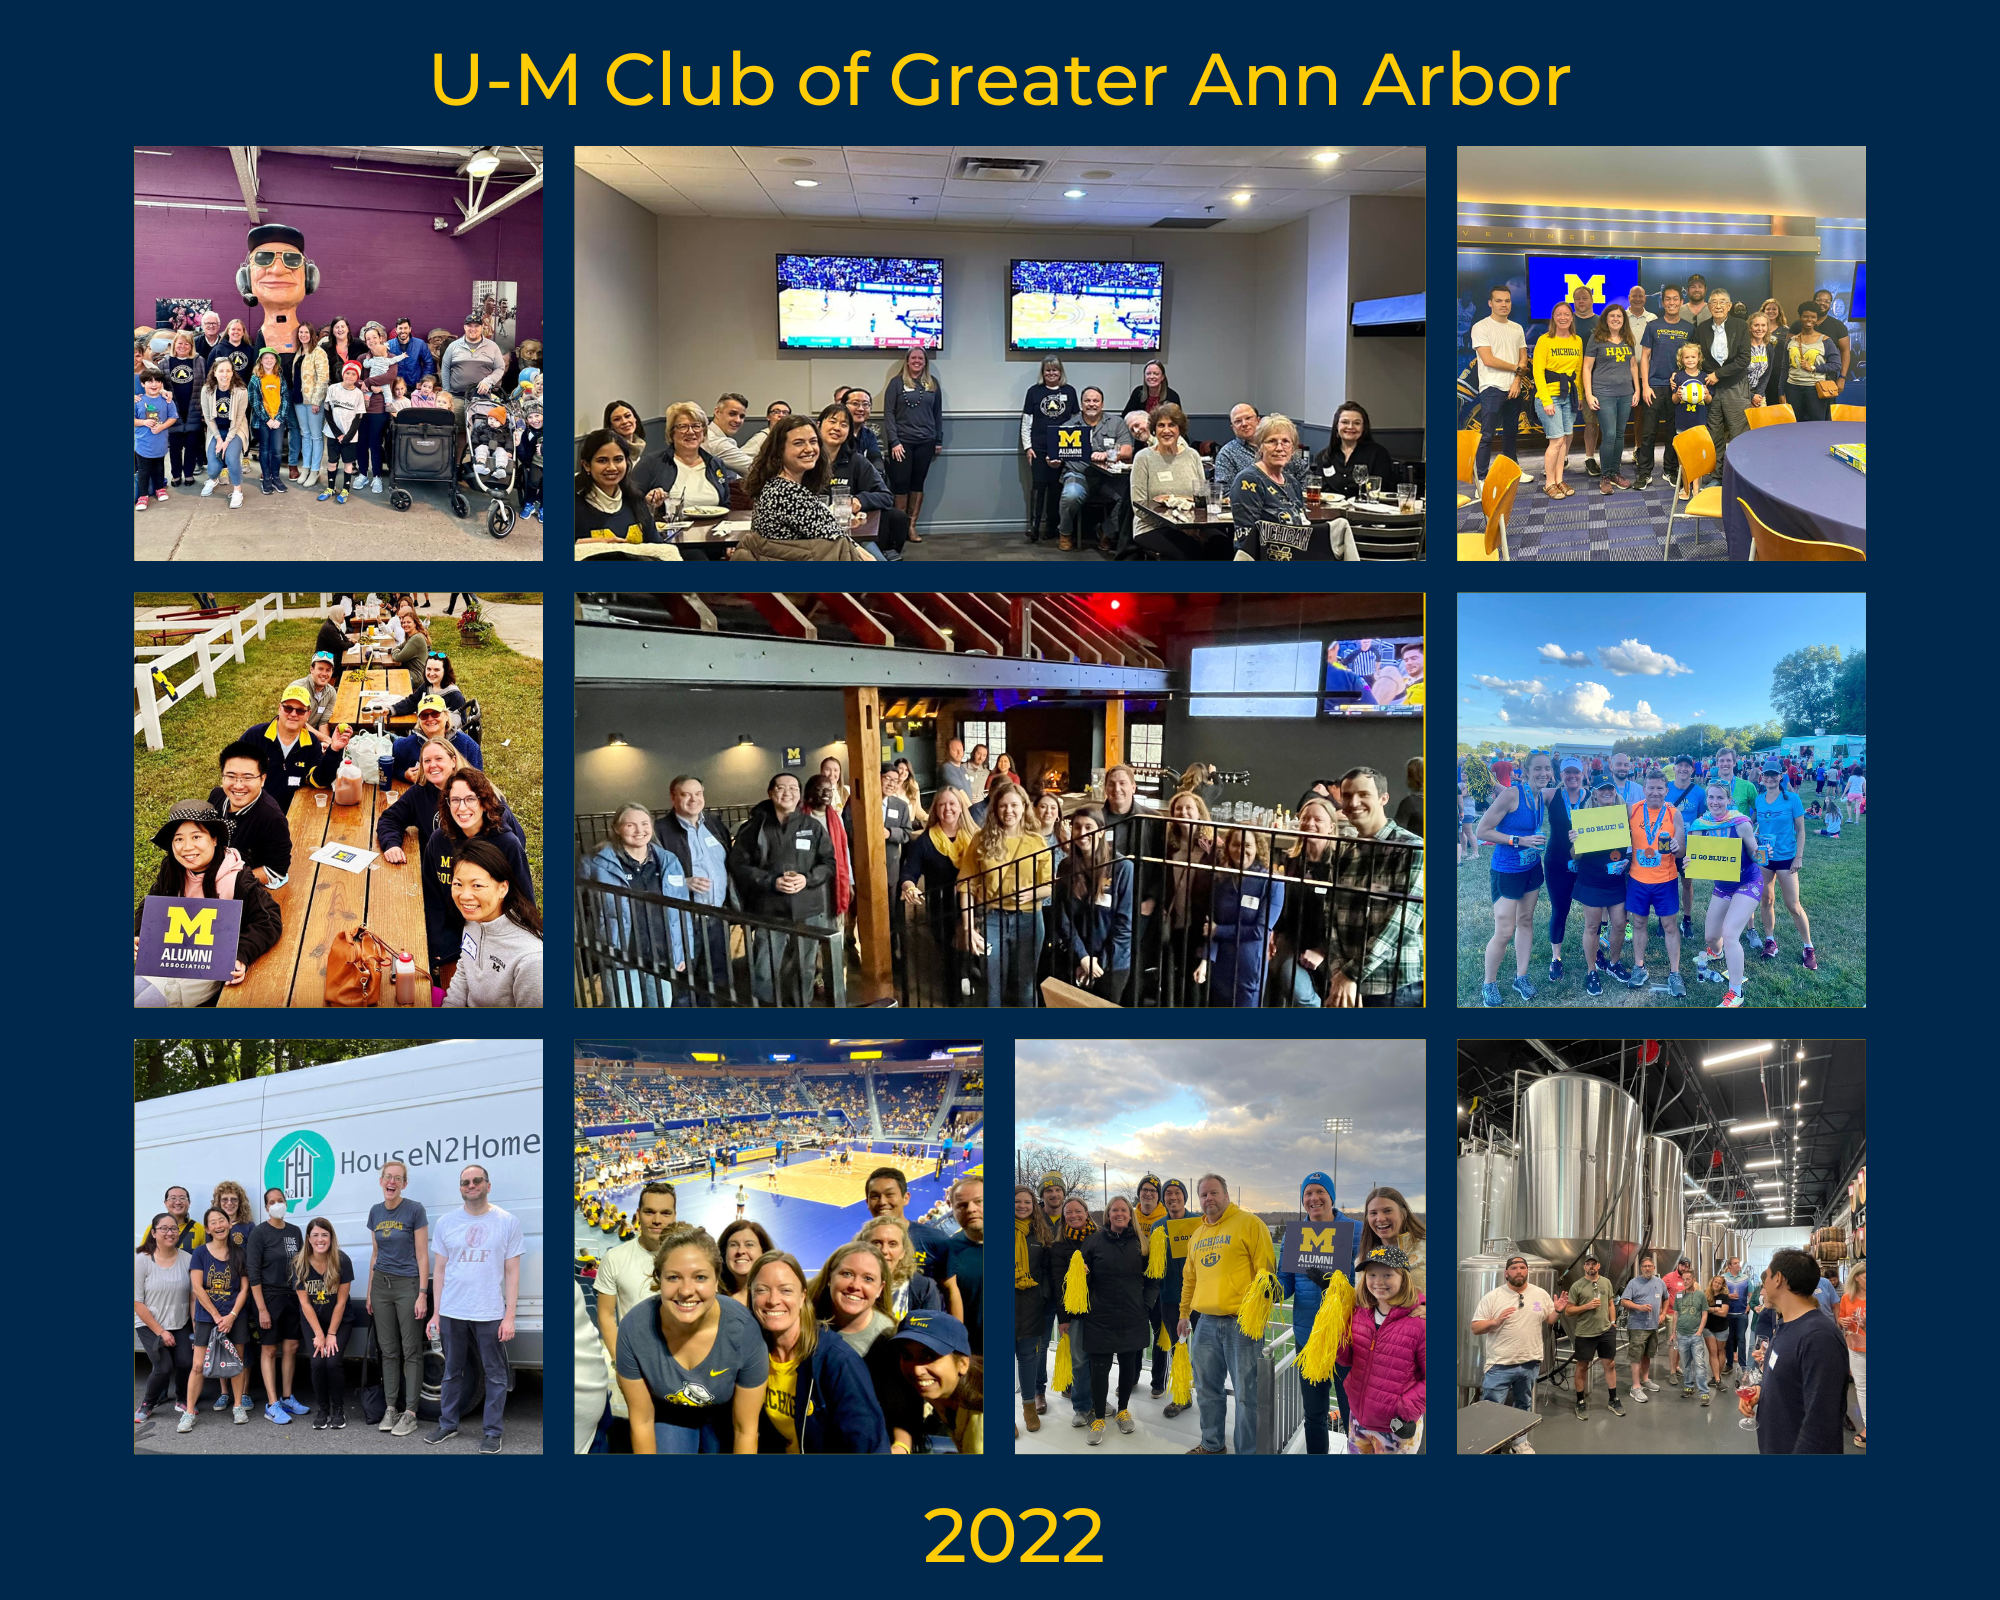 U-M Club of Greater Ann Arbor Year In Review photos from 2022 events